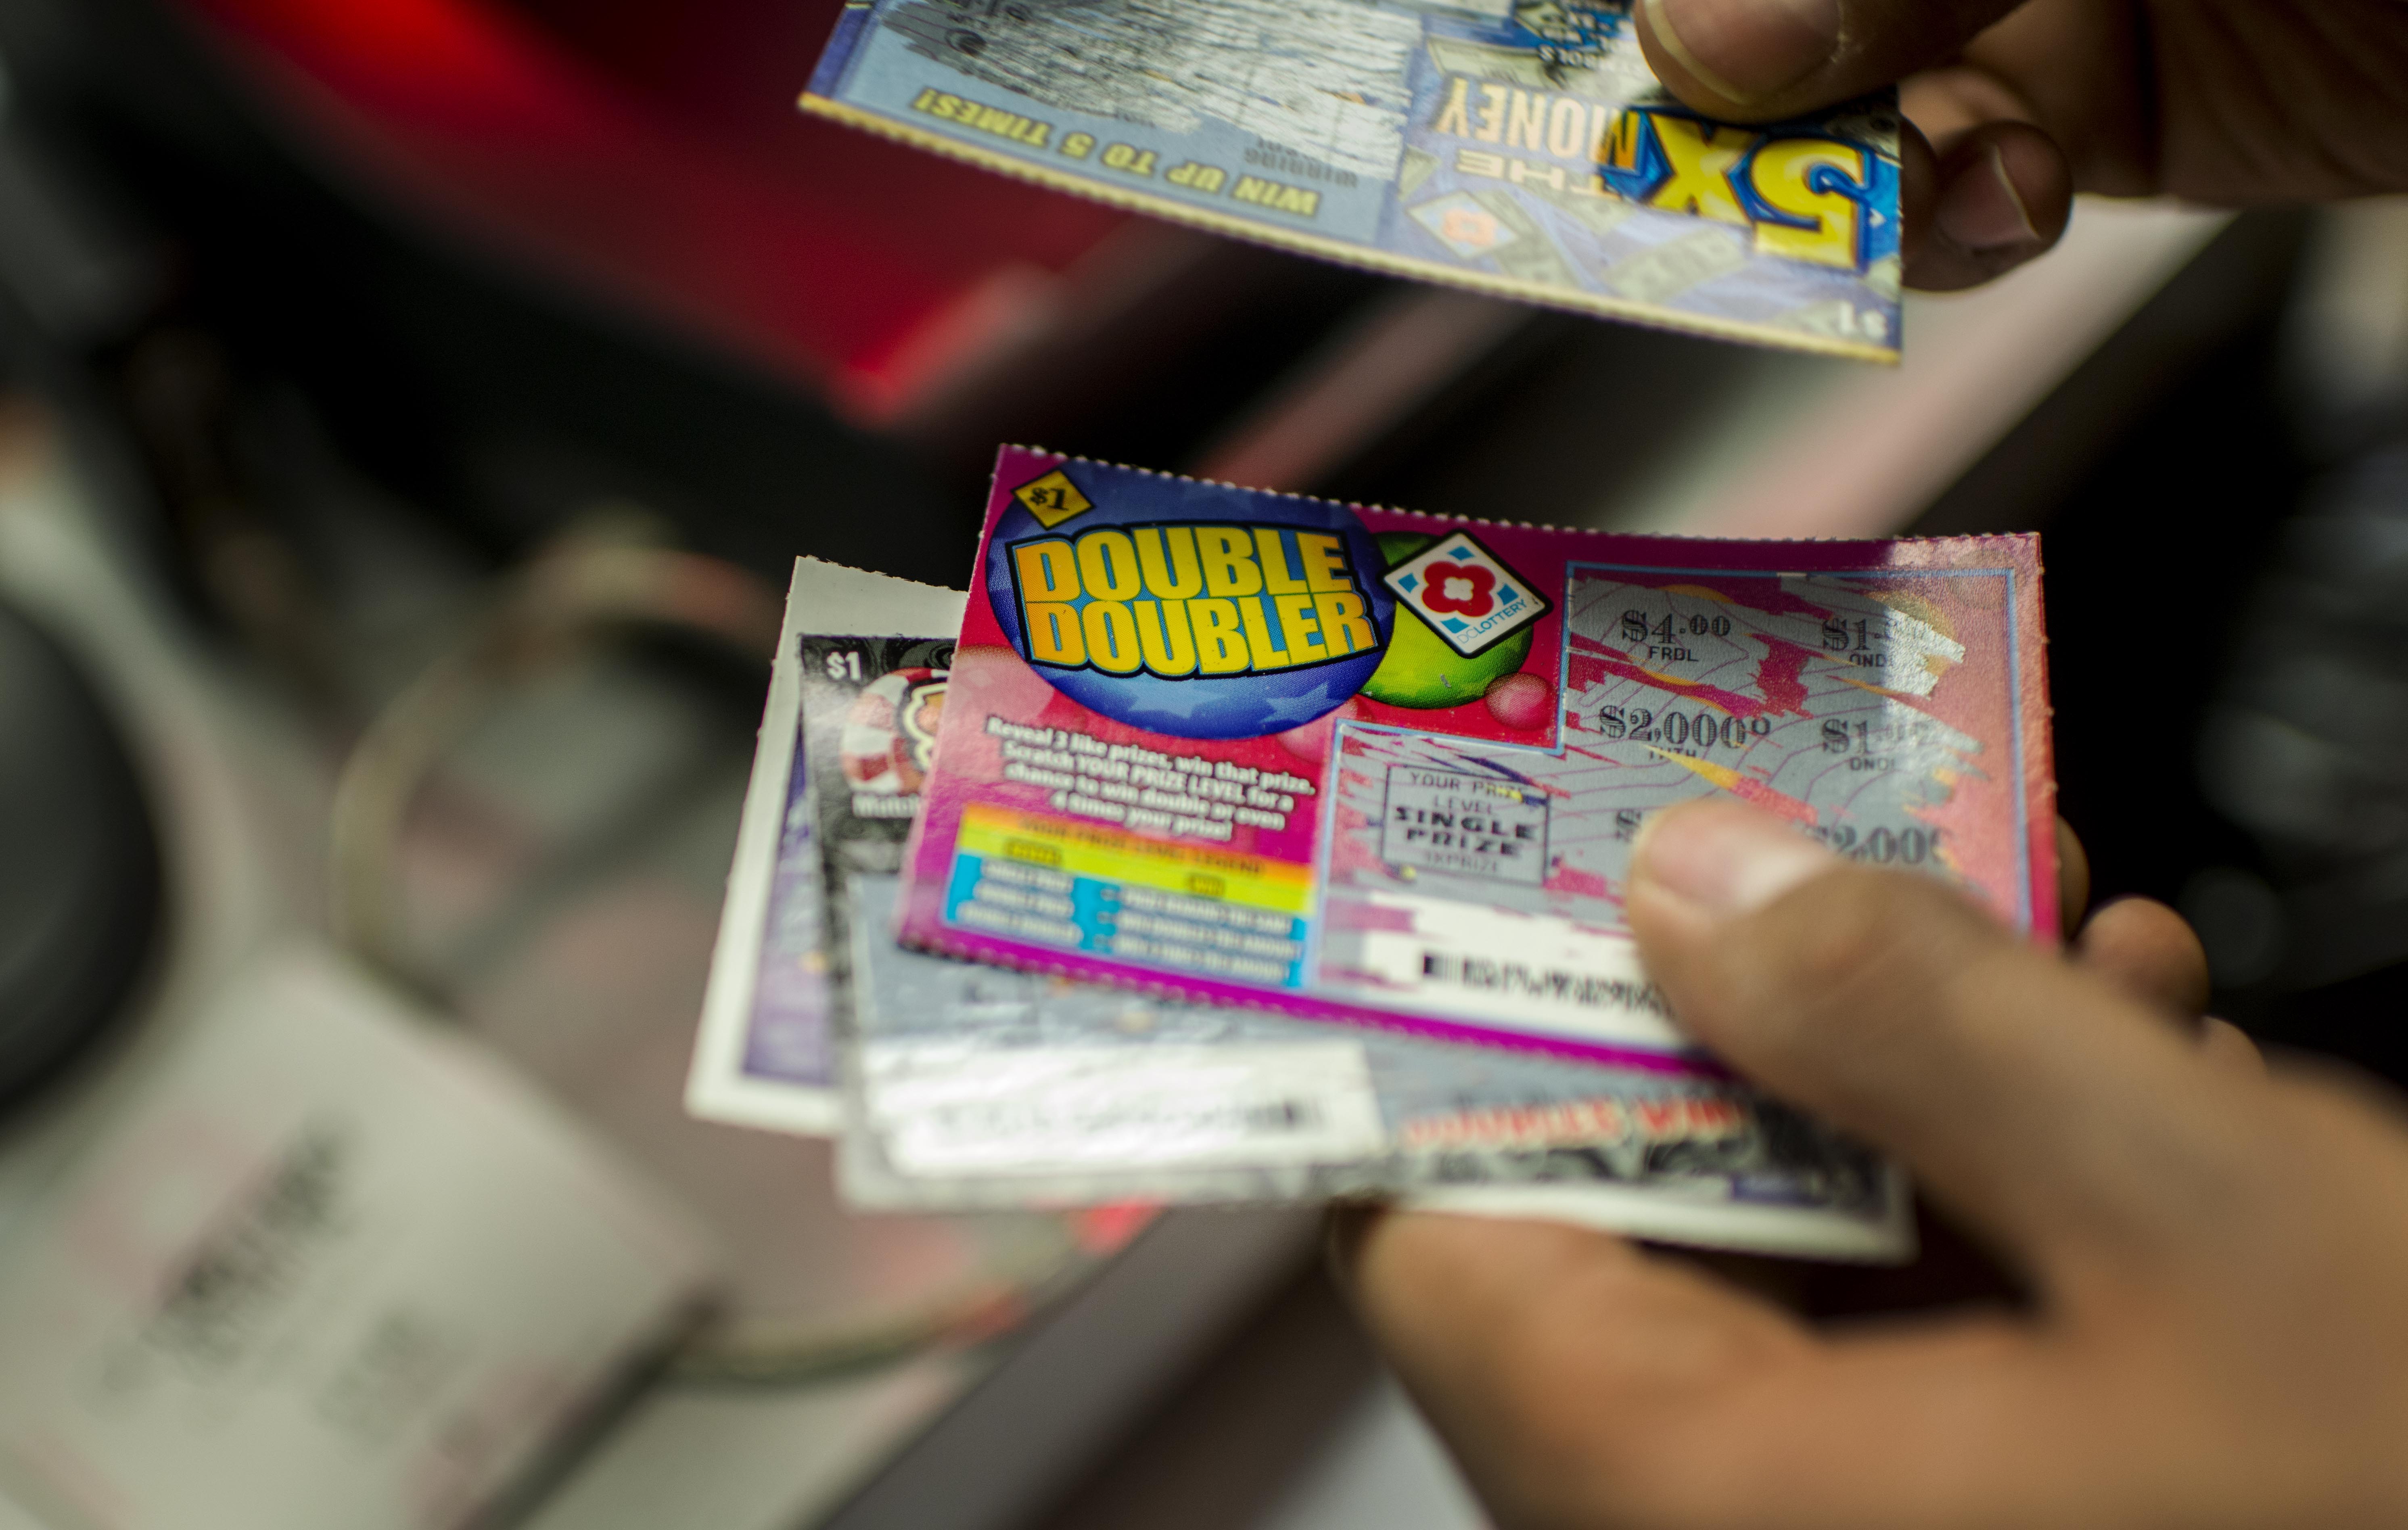 Scratch-Off Games  New York Lottery: Official Site